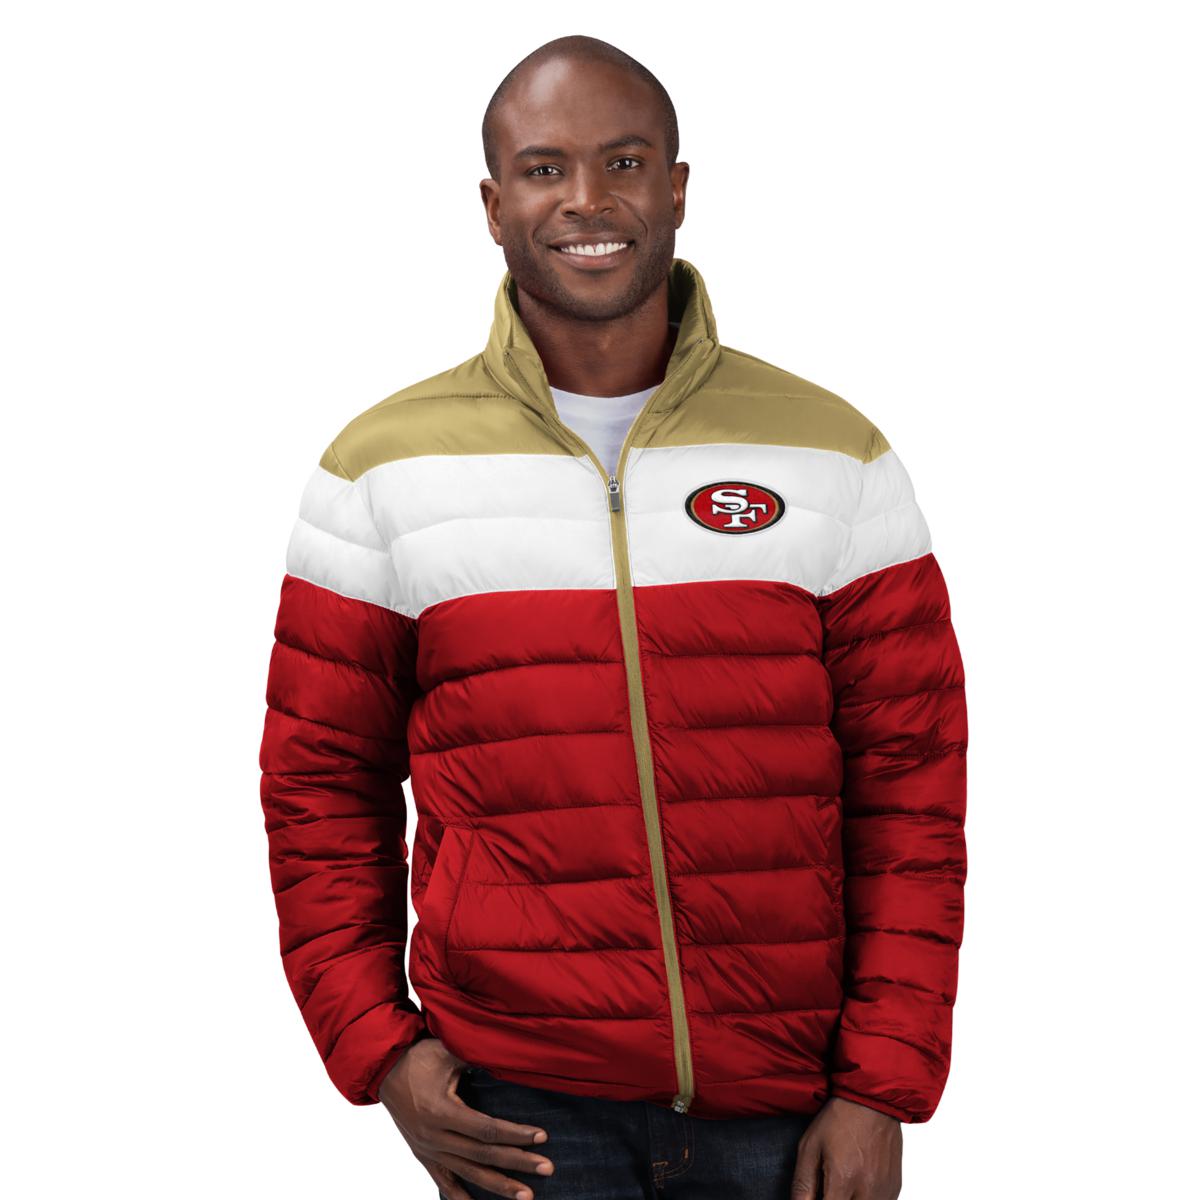 Officially Licensed NFL Men's Cold Front Quilted Puffer Jacket by Glll